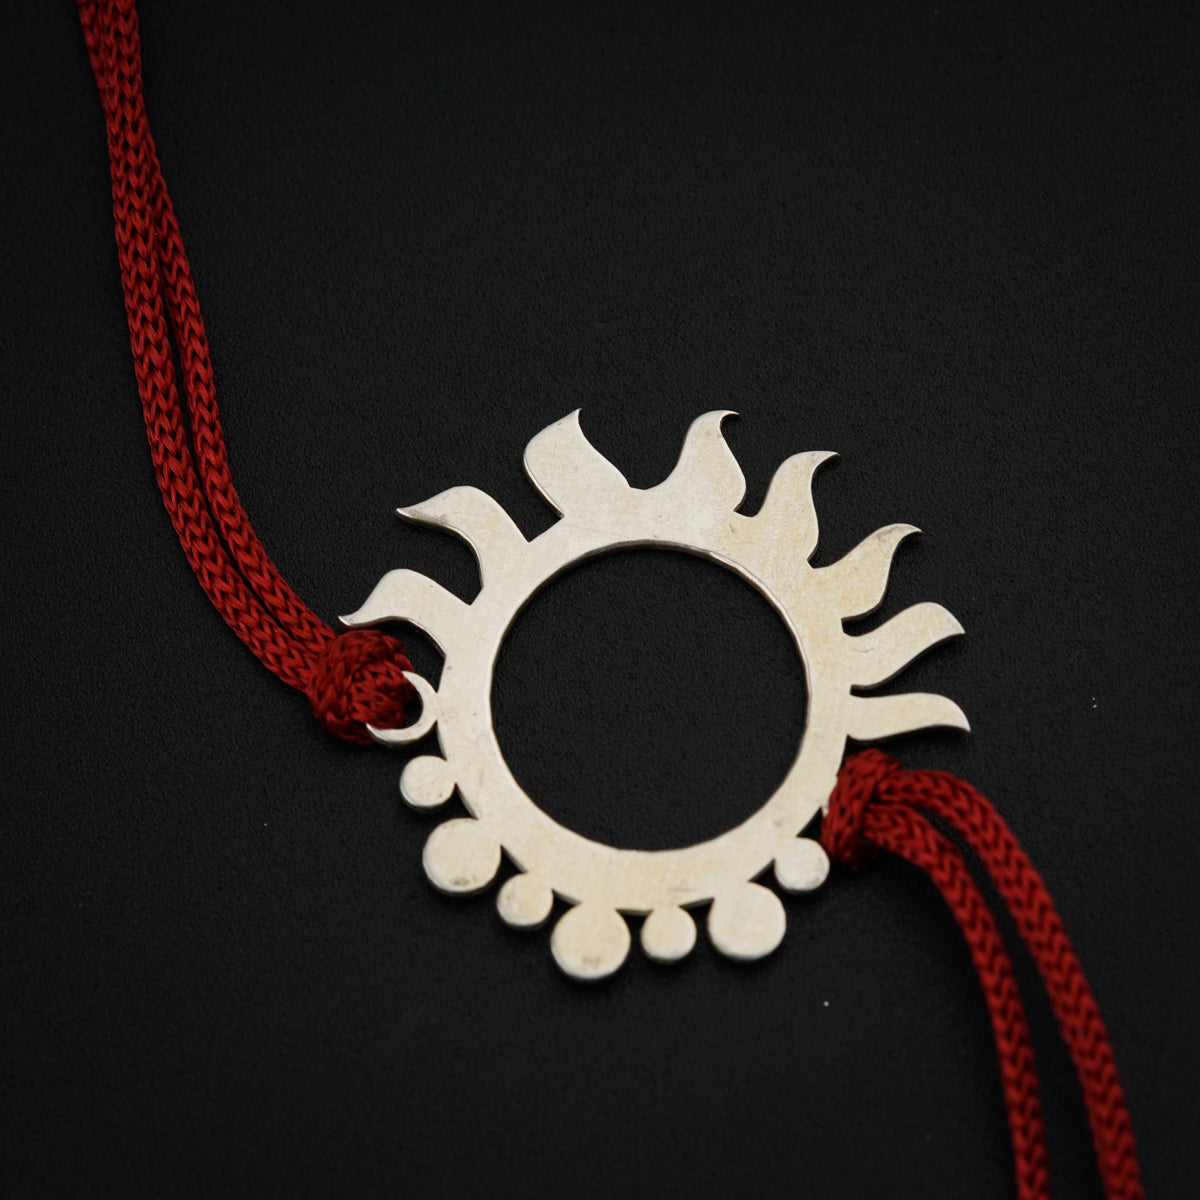 a necklace with a sun design on a red string